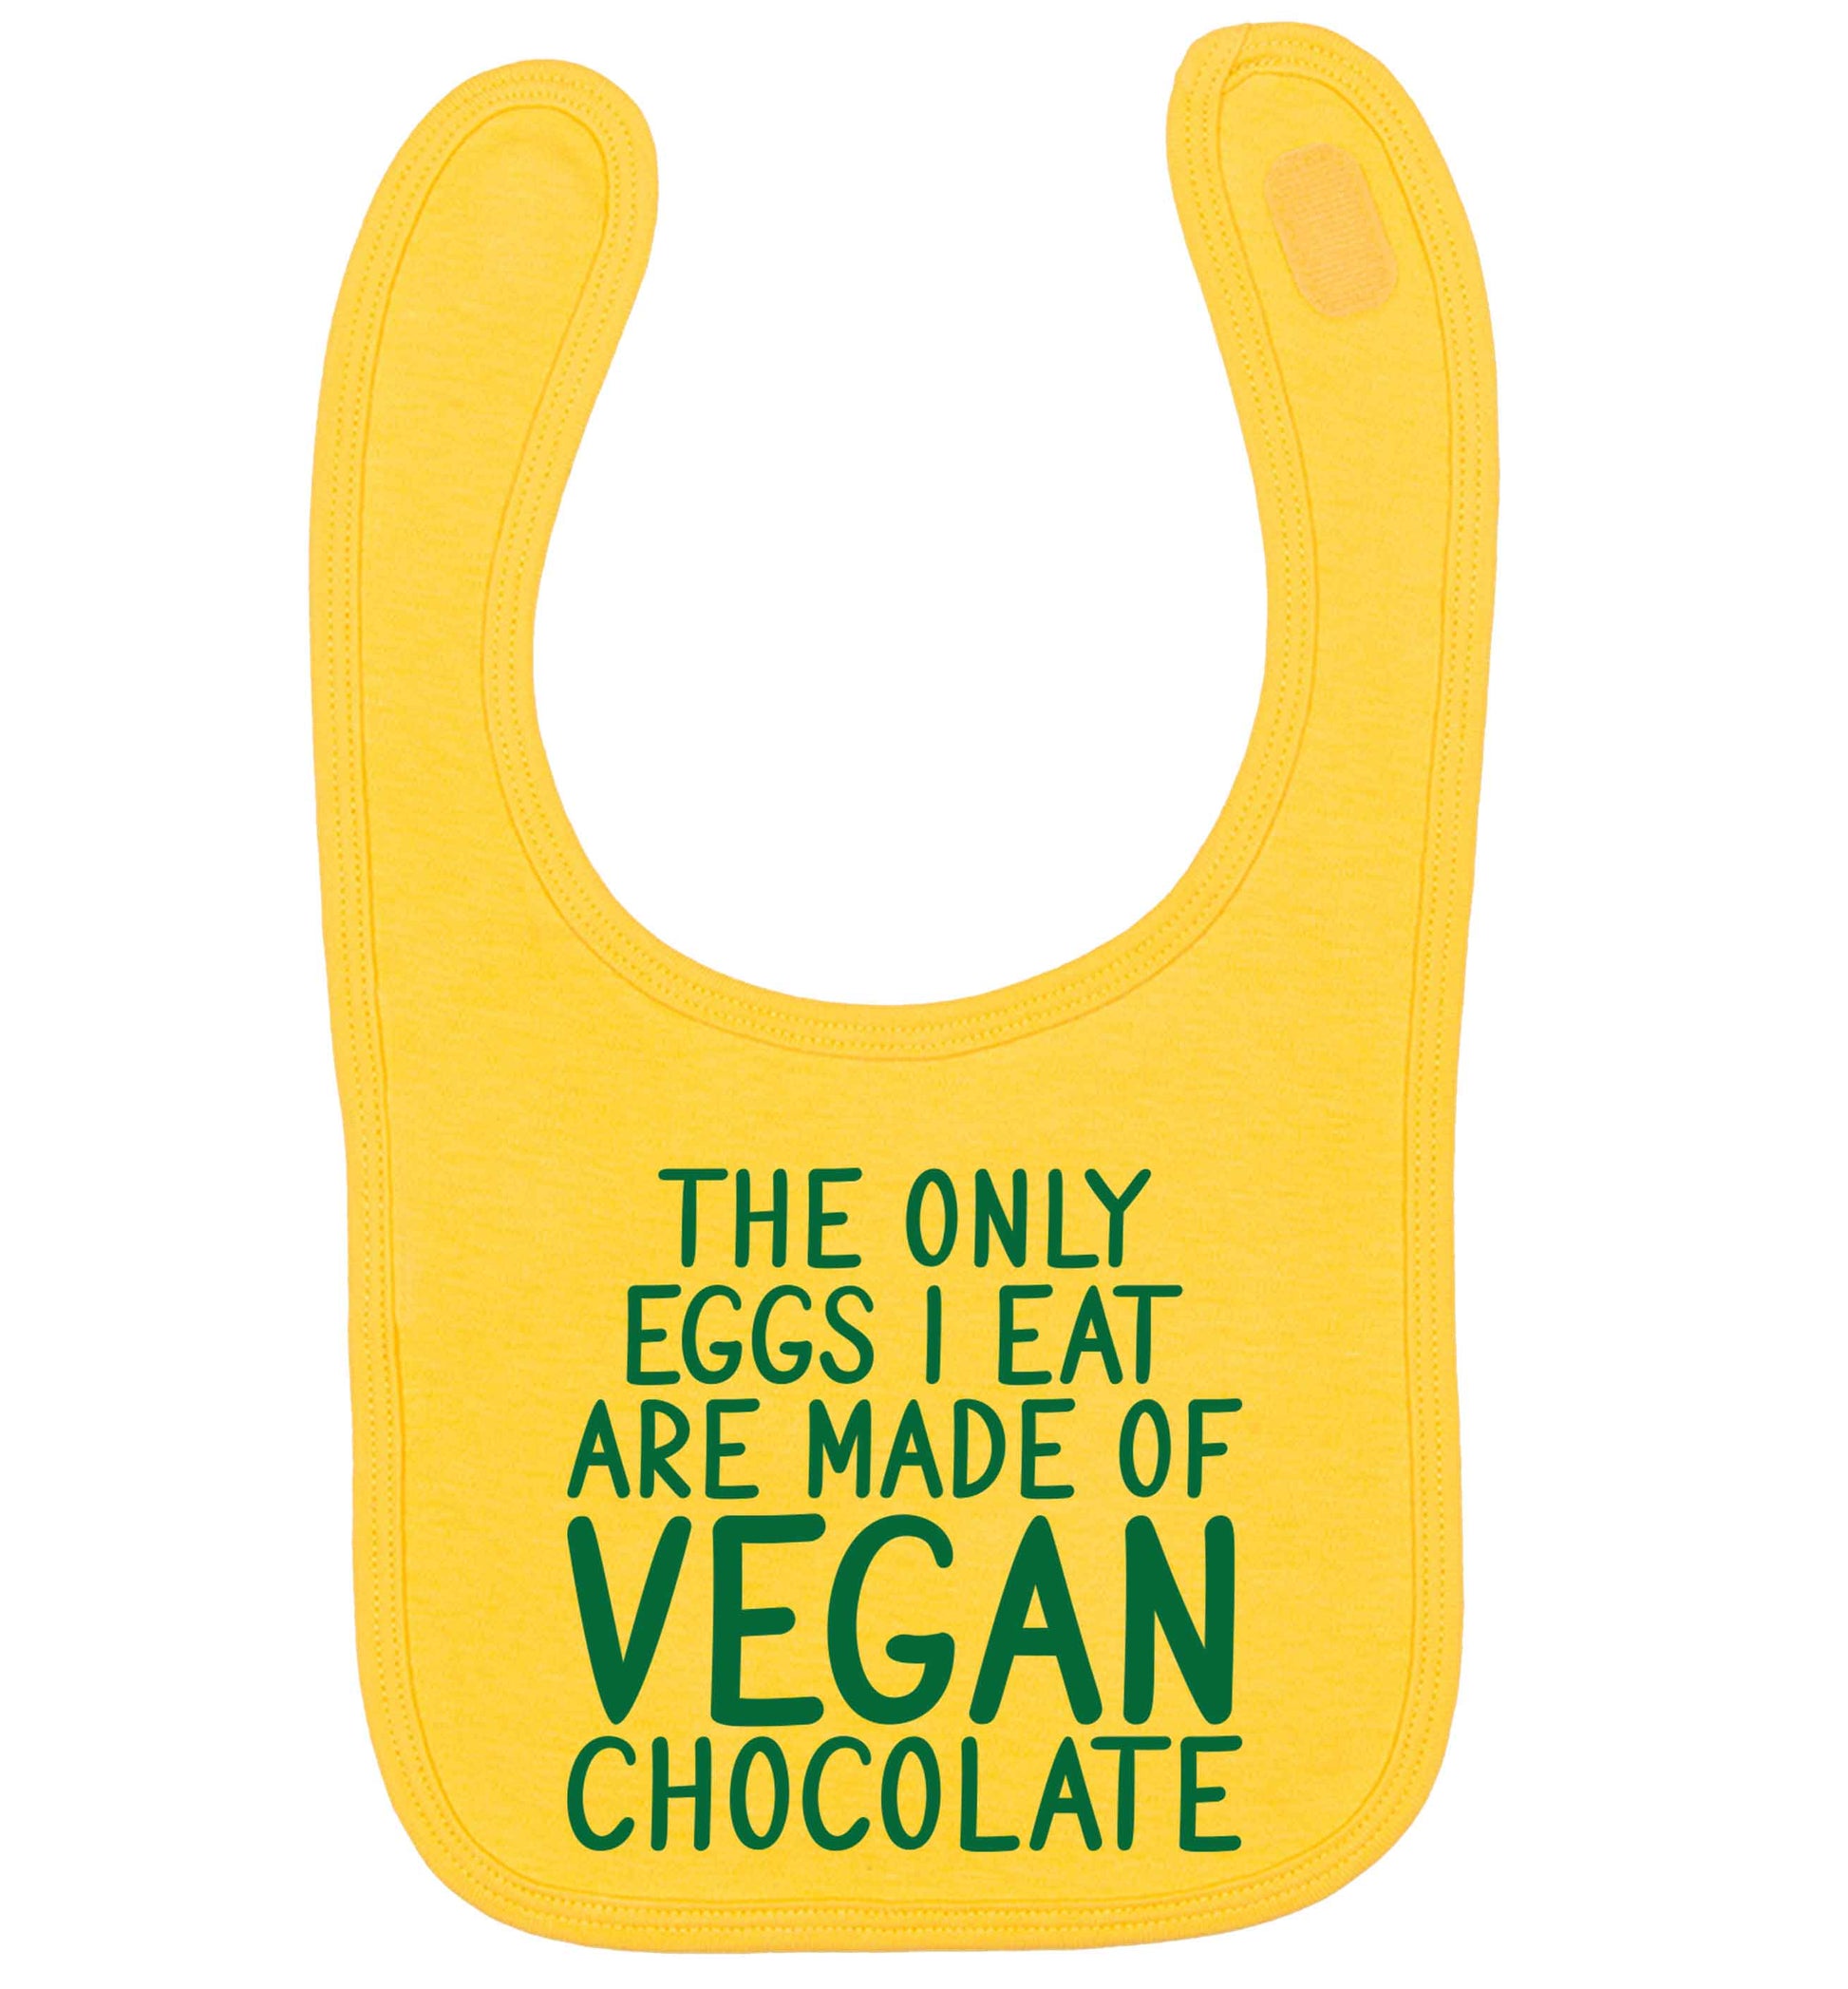 The only eggs I eat are made of vegan chocolate yellow baby bib